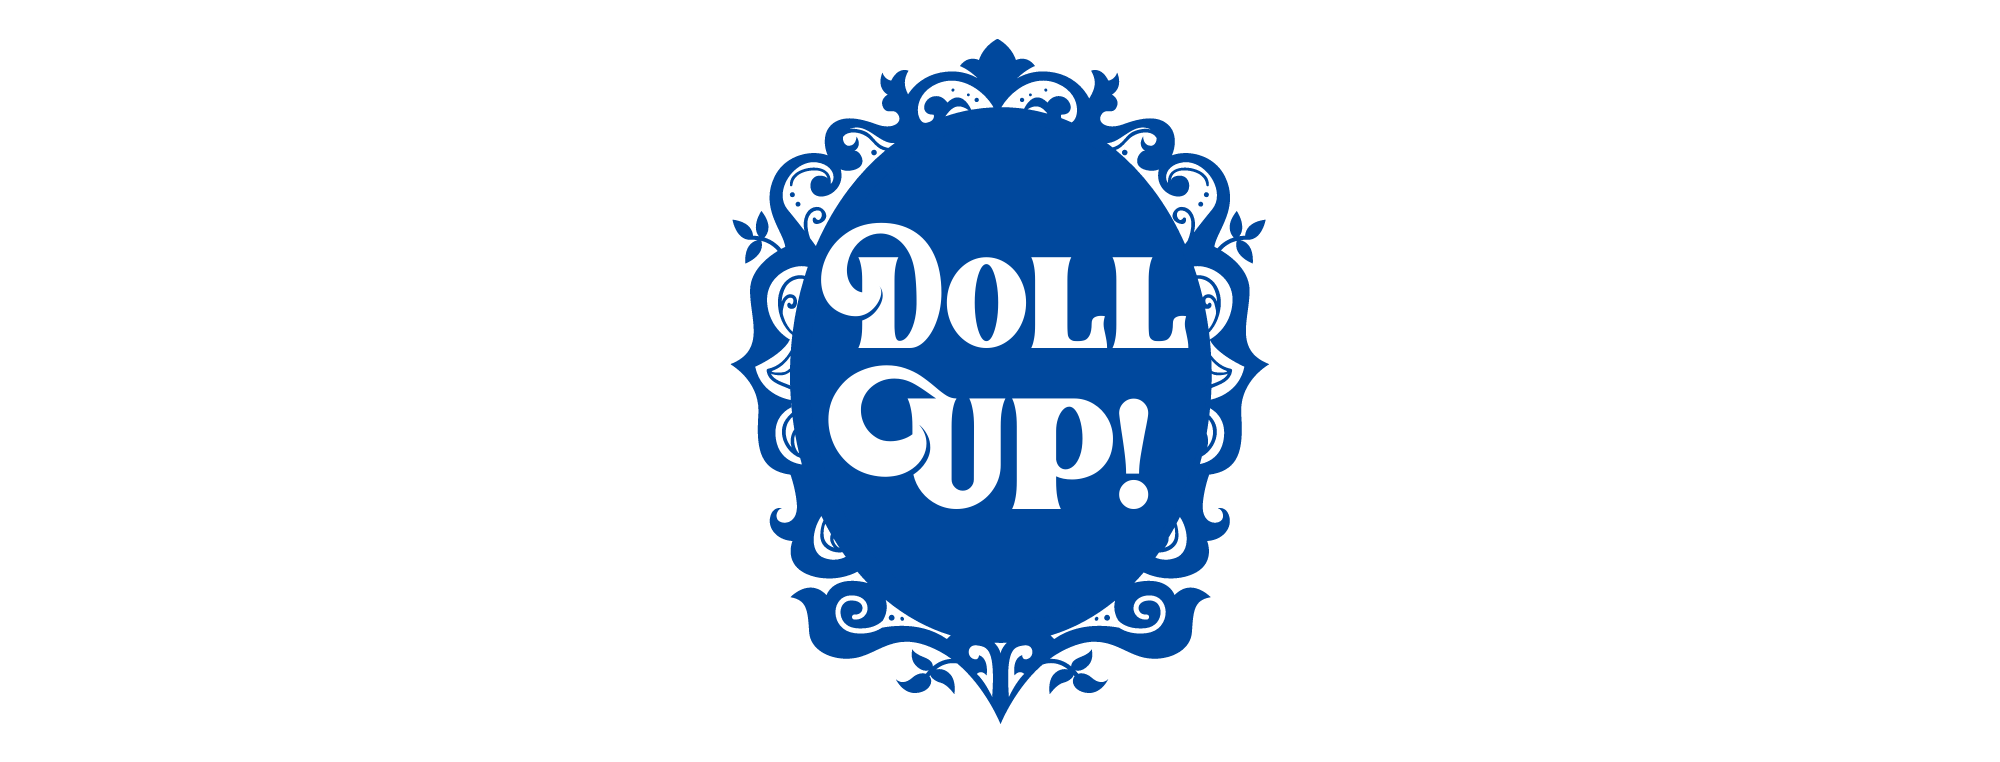 DOLL UP!